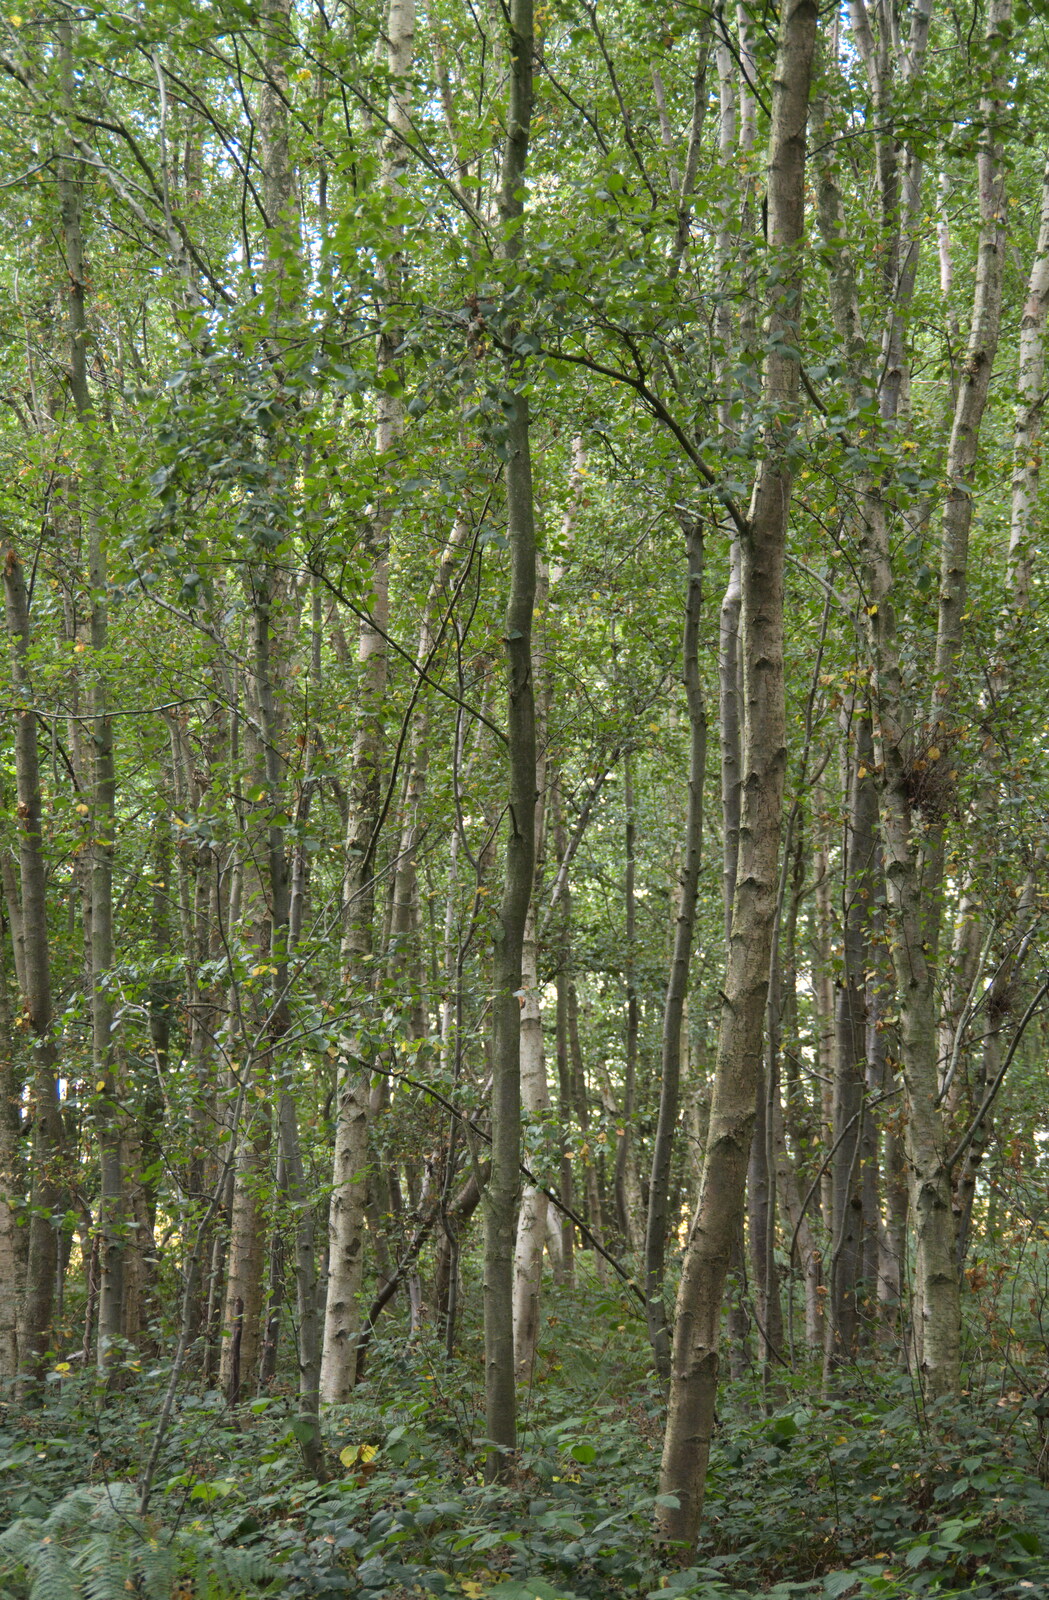 A dense stack of birch trees from Jules Visits, and a Trip to Tyrrel's Wood, Pulham Market, Norfolk - 16th August 2020